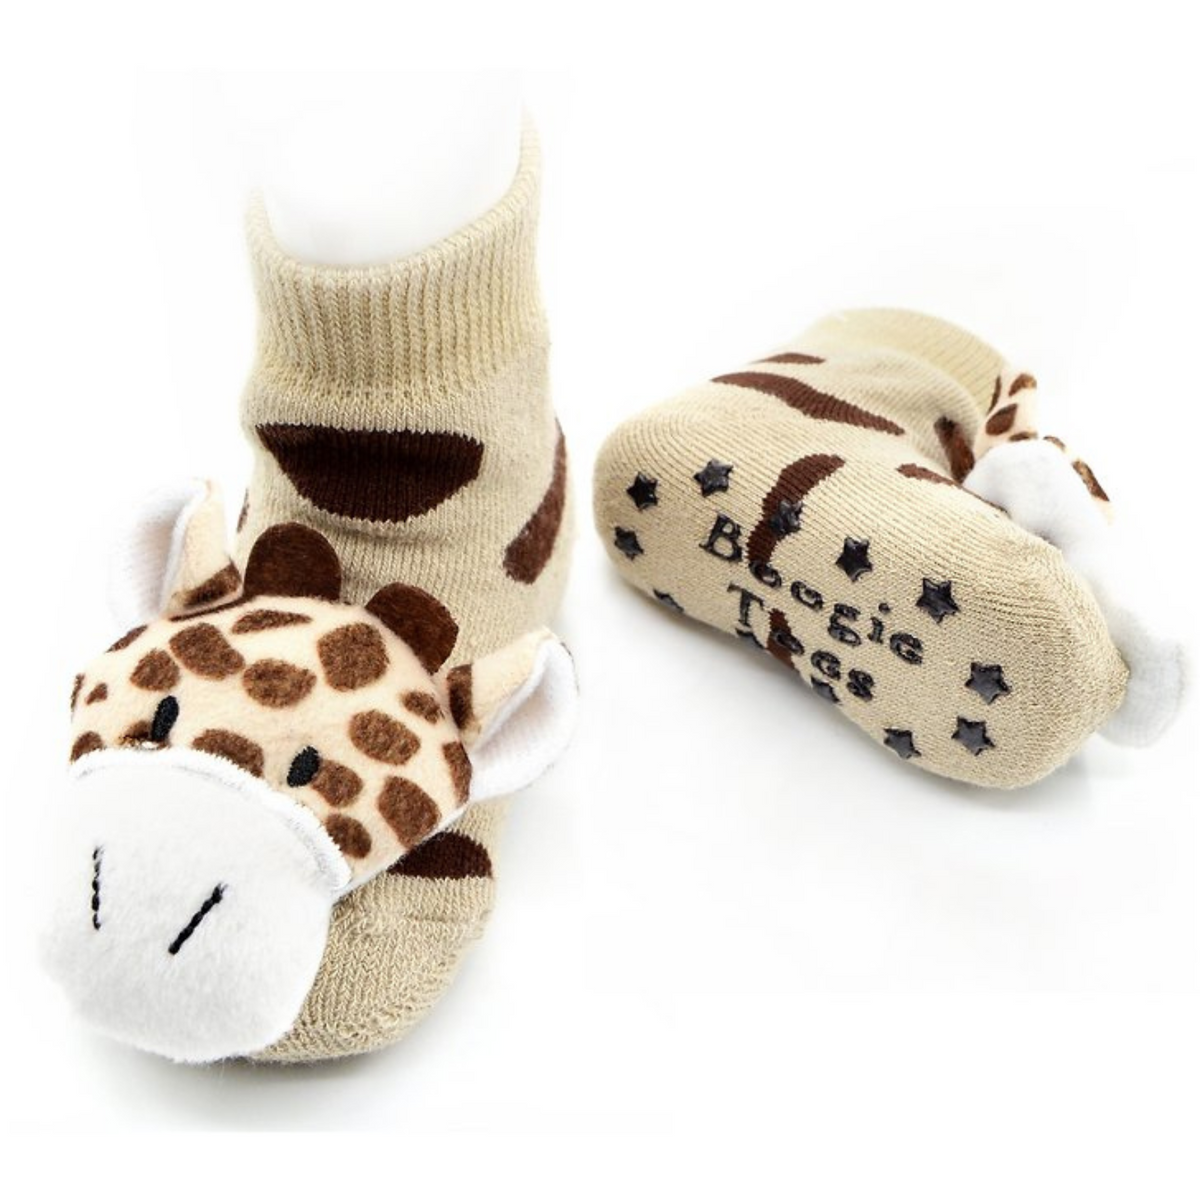 Boogie Toes beige baby socks with grips on the bottom featuring a Giraffe